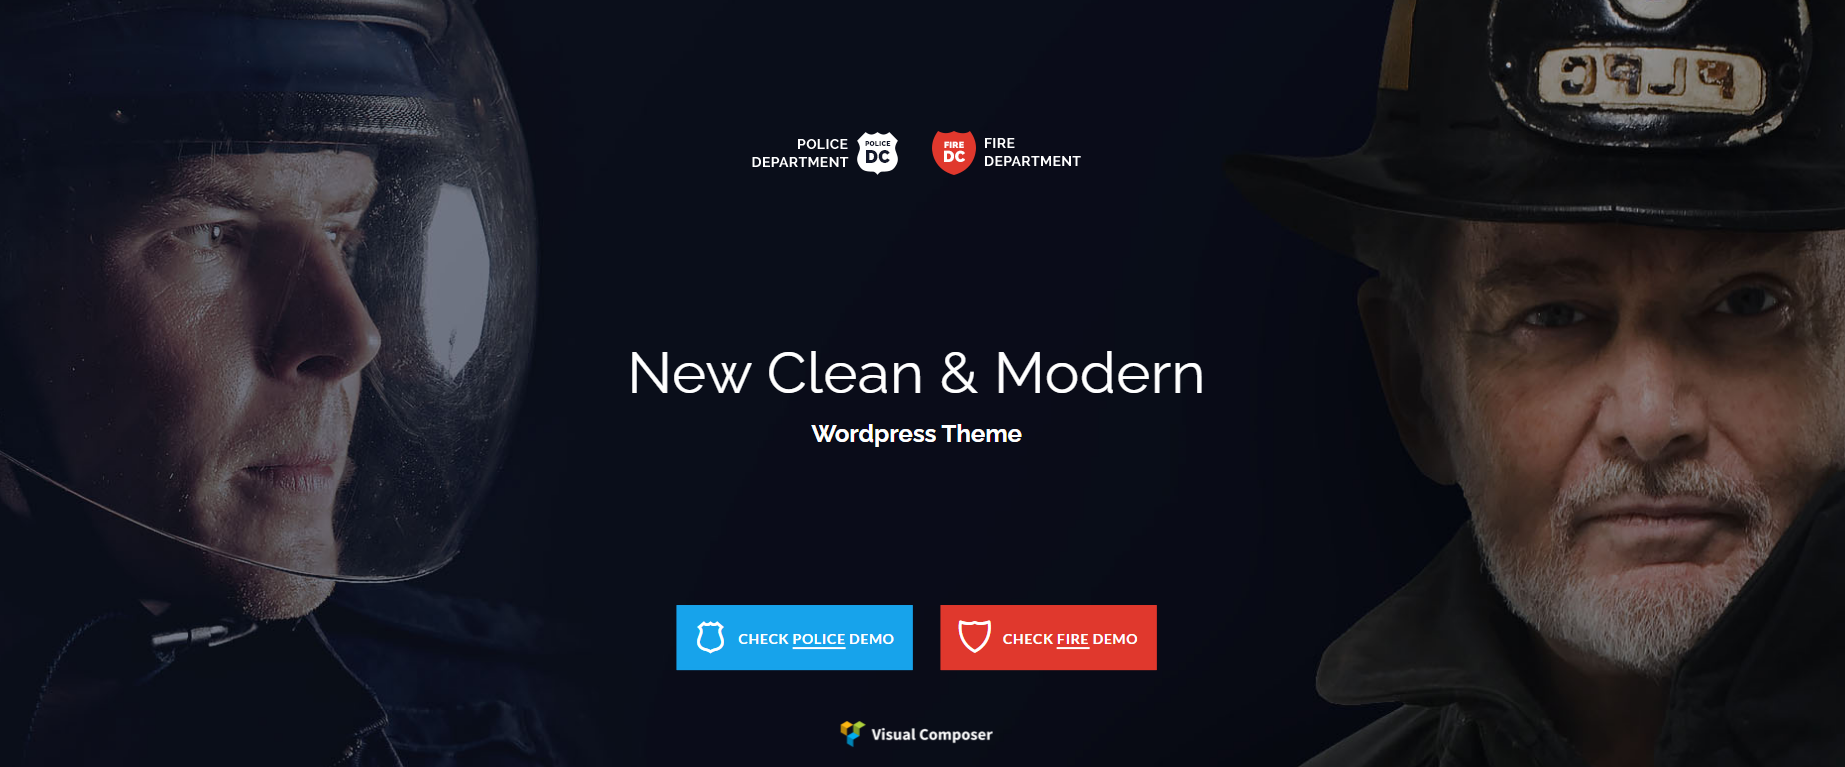 Police Fire Department and Security Business WordPress Theme Nulled